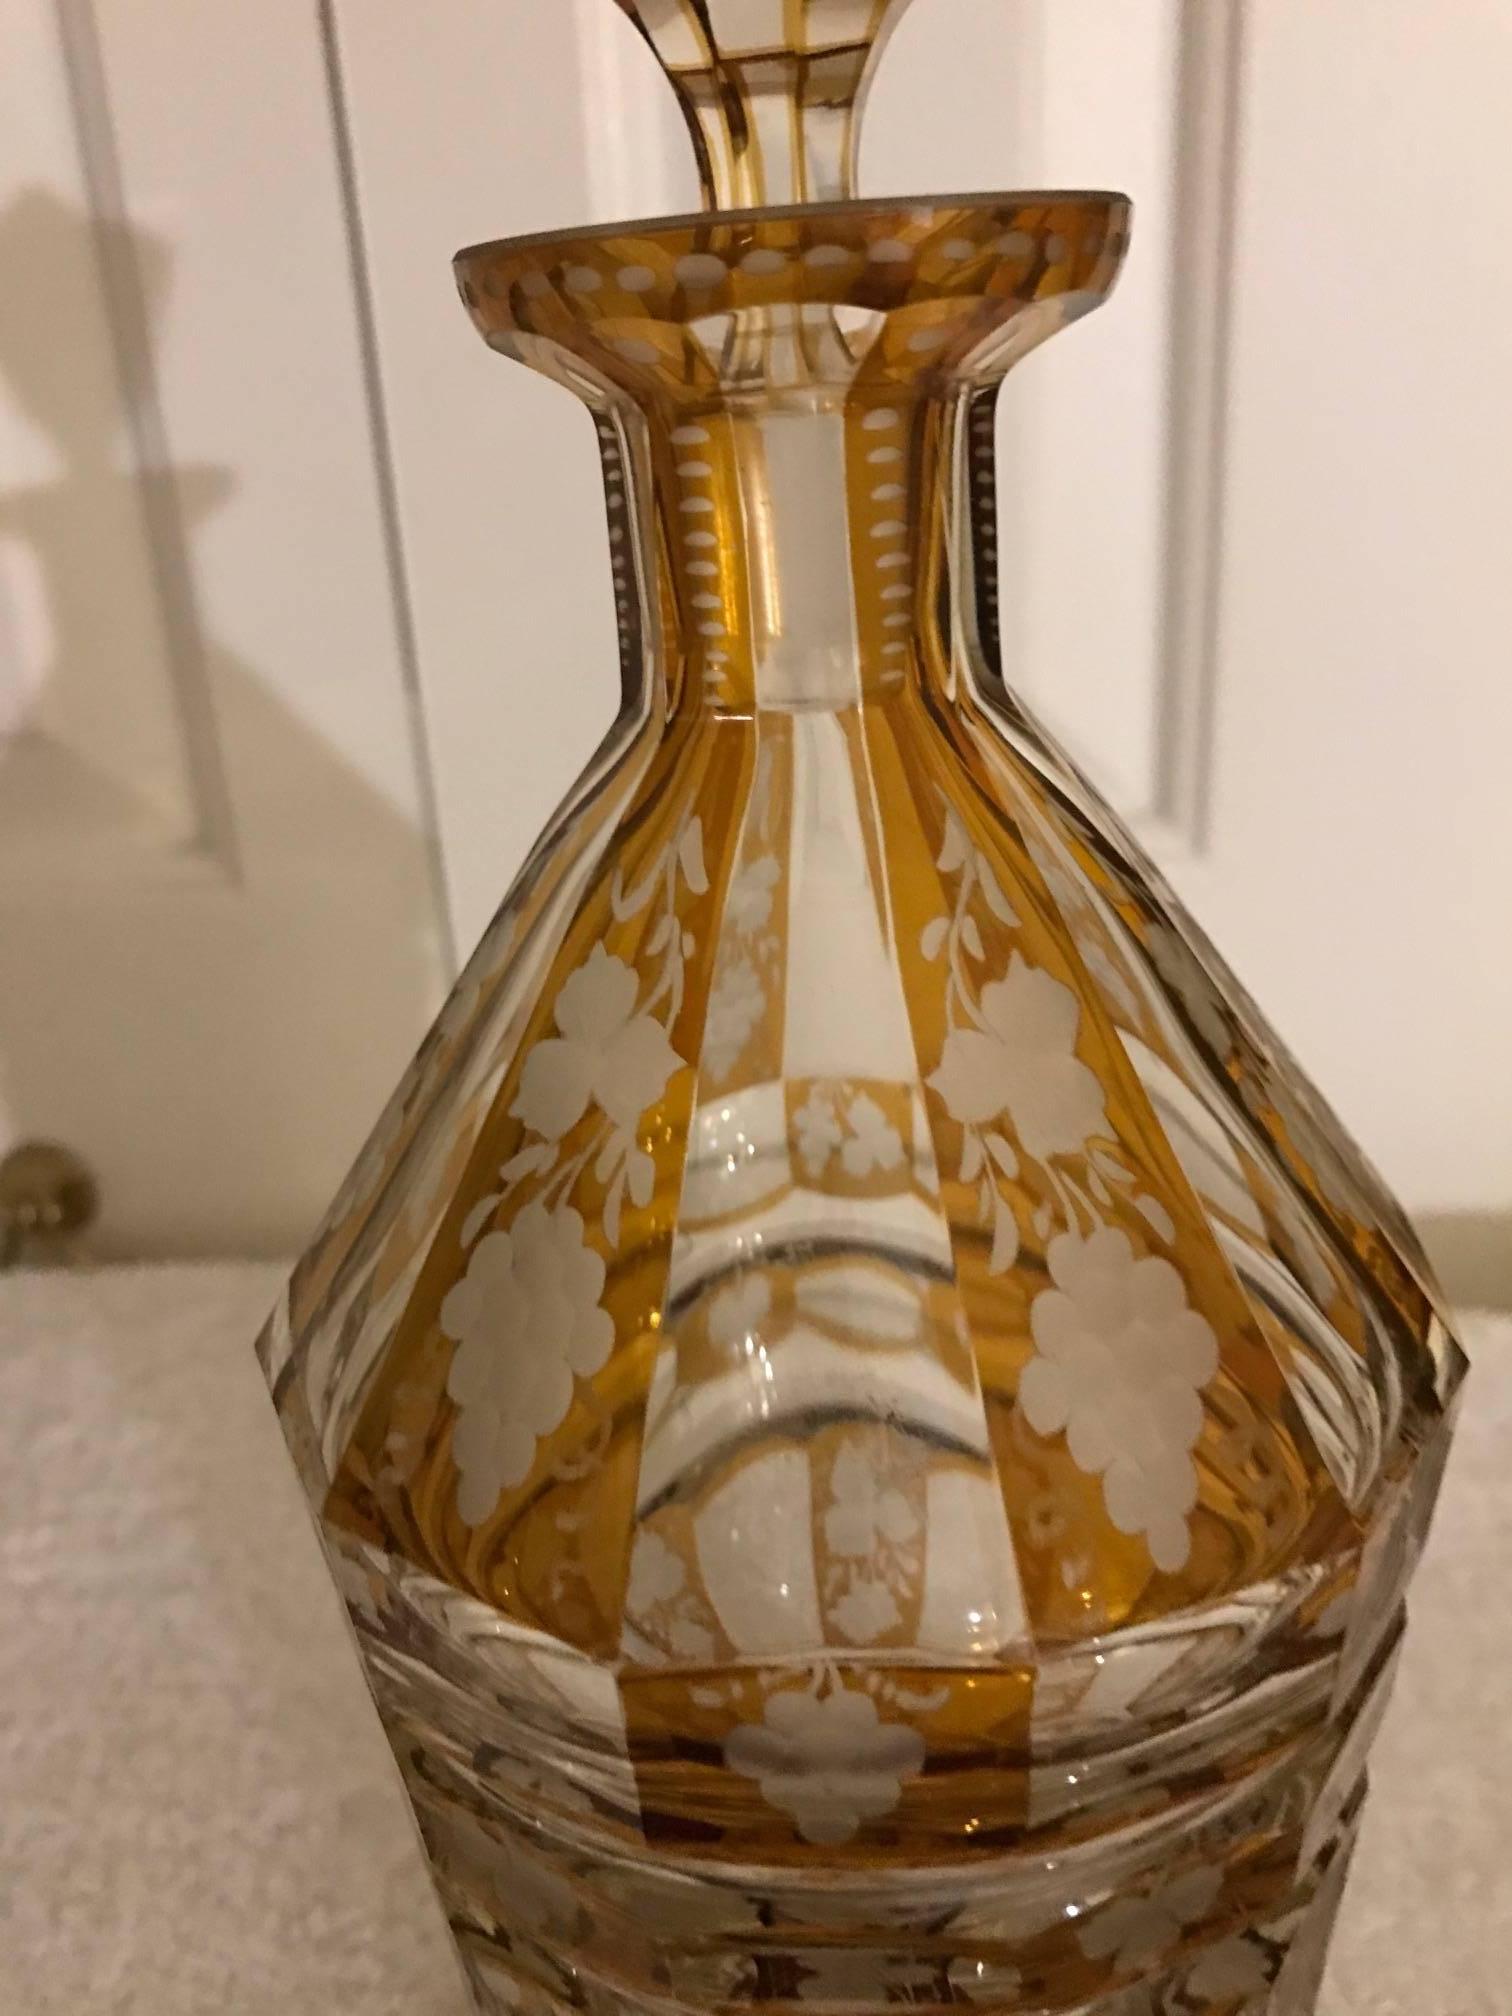 Elegant flat panel cut tapered decanter with intaglio cut grape pattern. The Citrine yellow overlay with engraved cutting to reveal the clear base glass. Original stopper in excellent condition